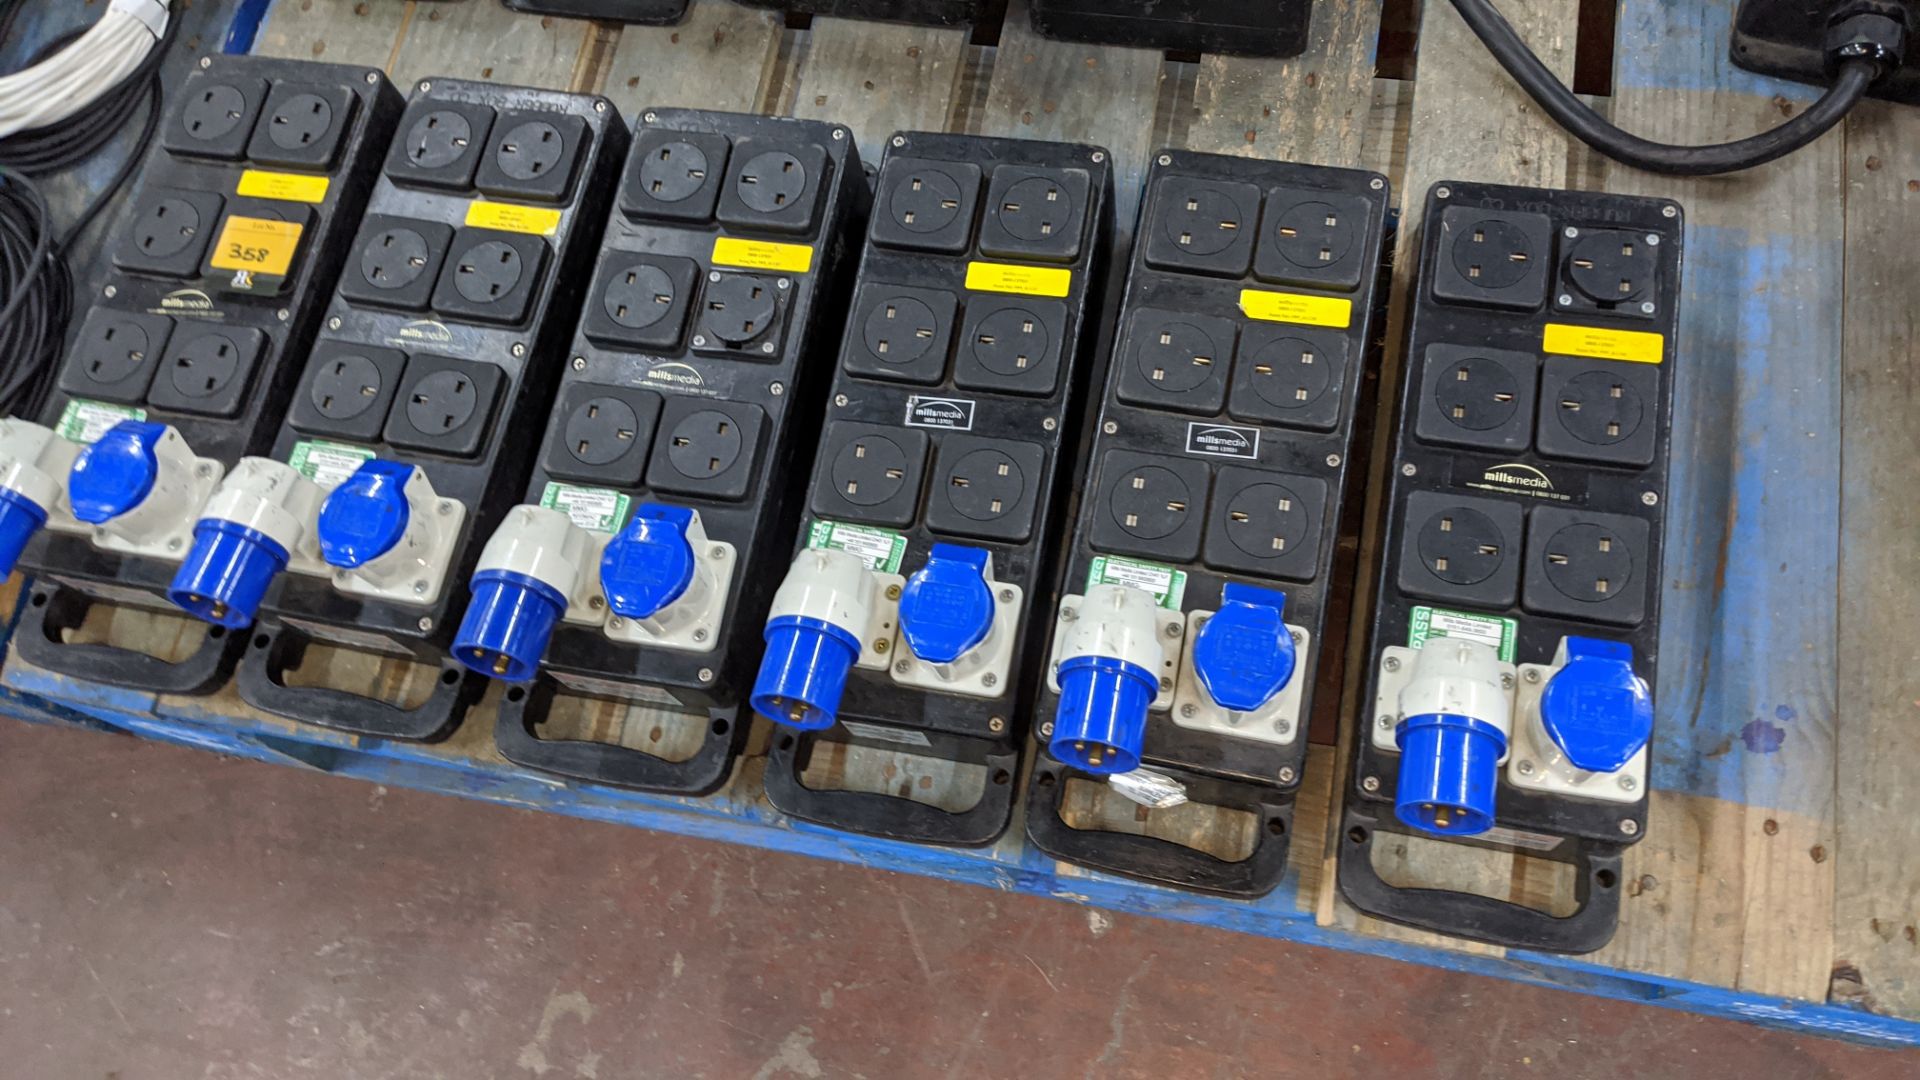 6 off power distribution boards Lots 51 - 480 comprise the total assets of Mills Media Ltd in - Image 3 of 6